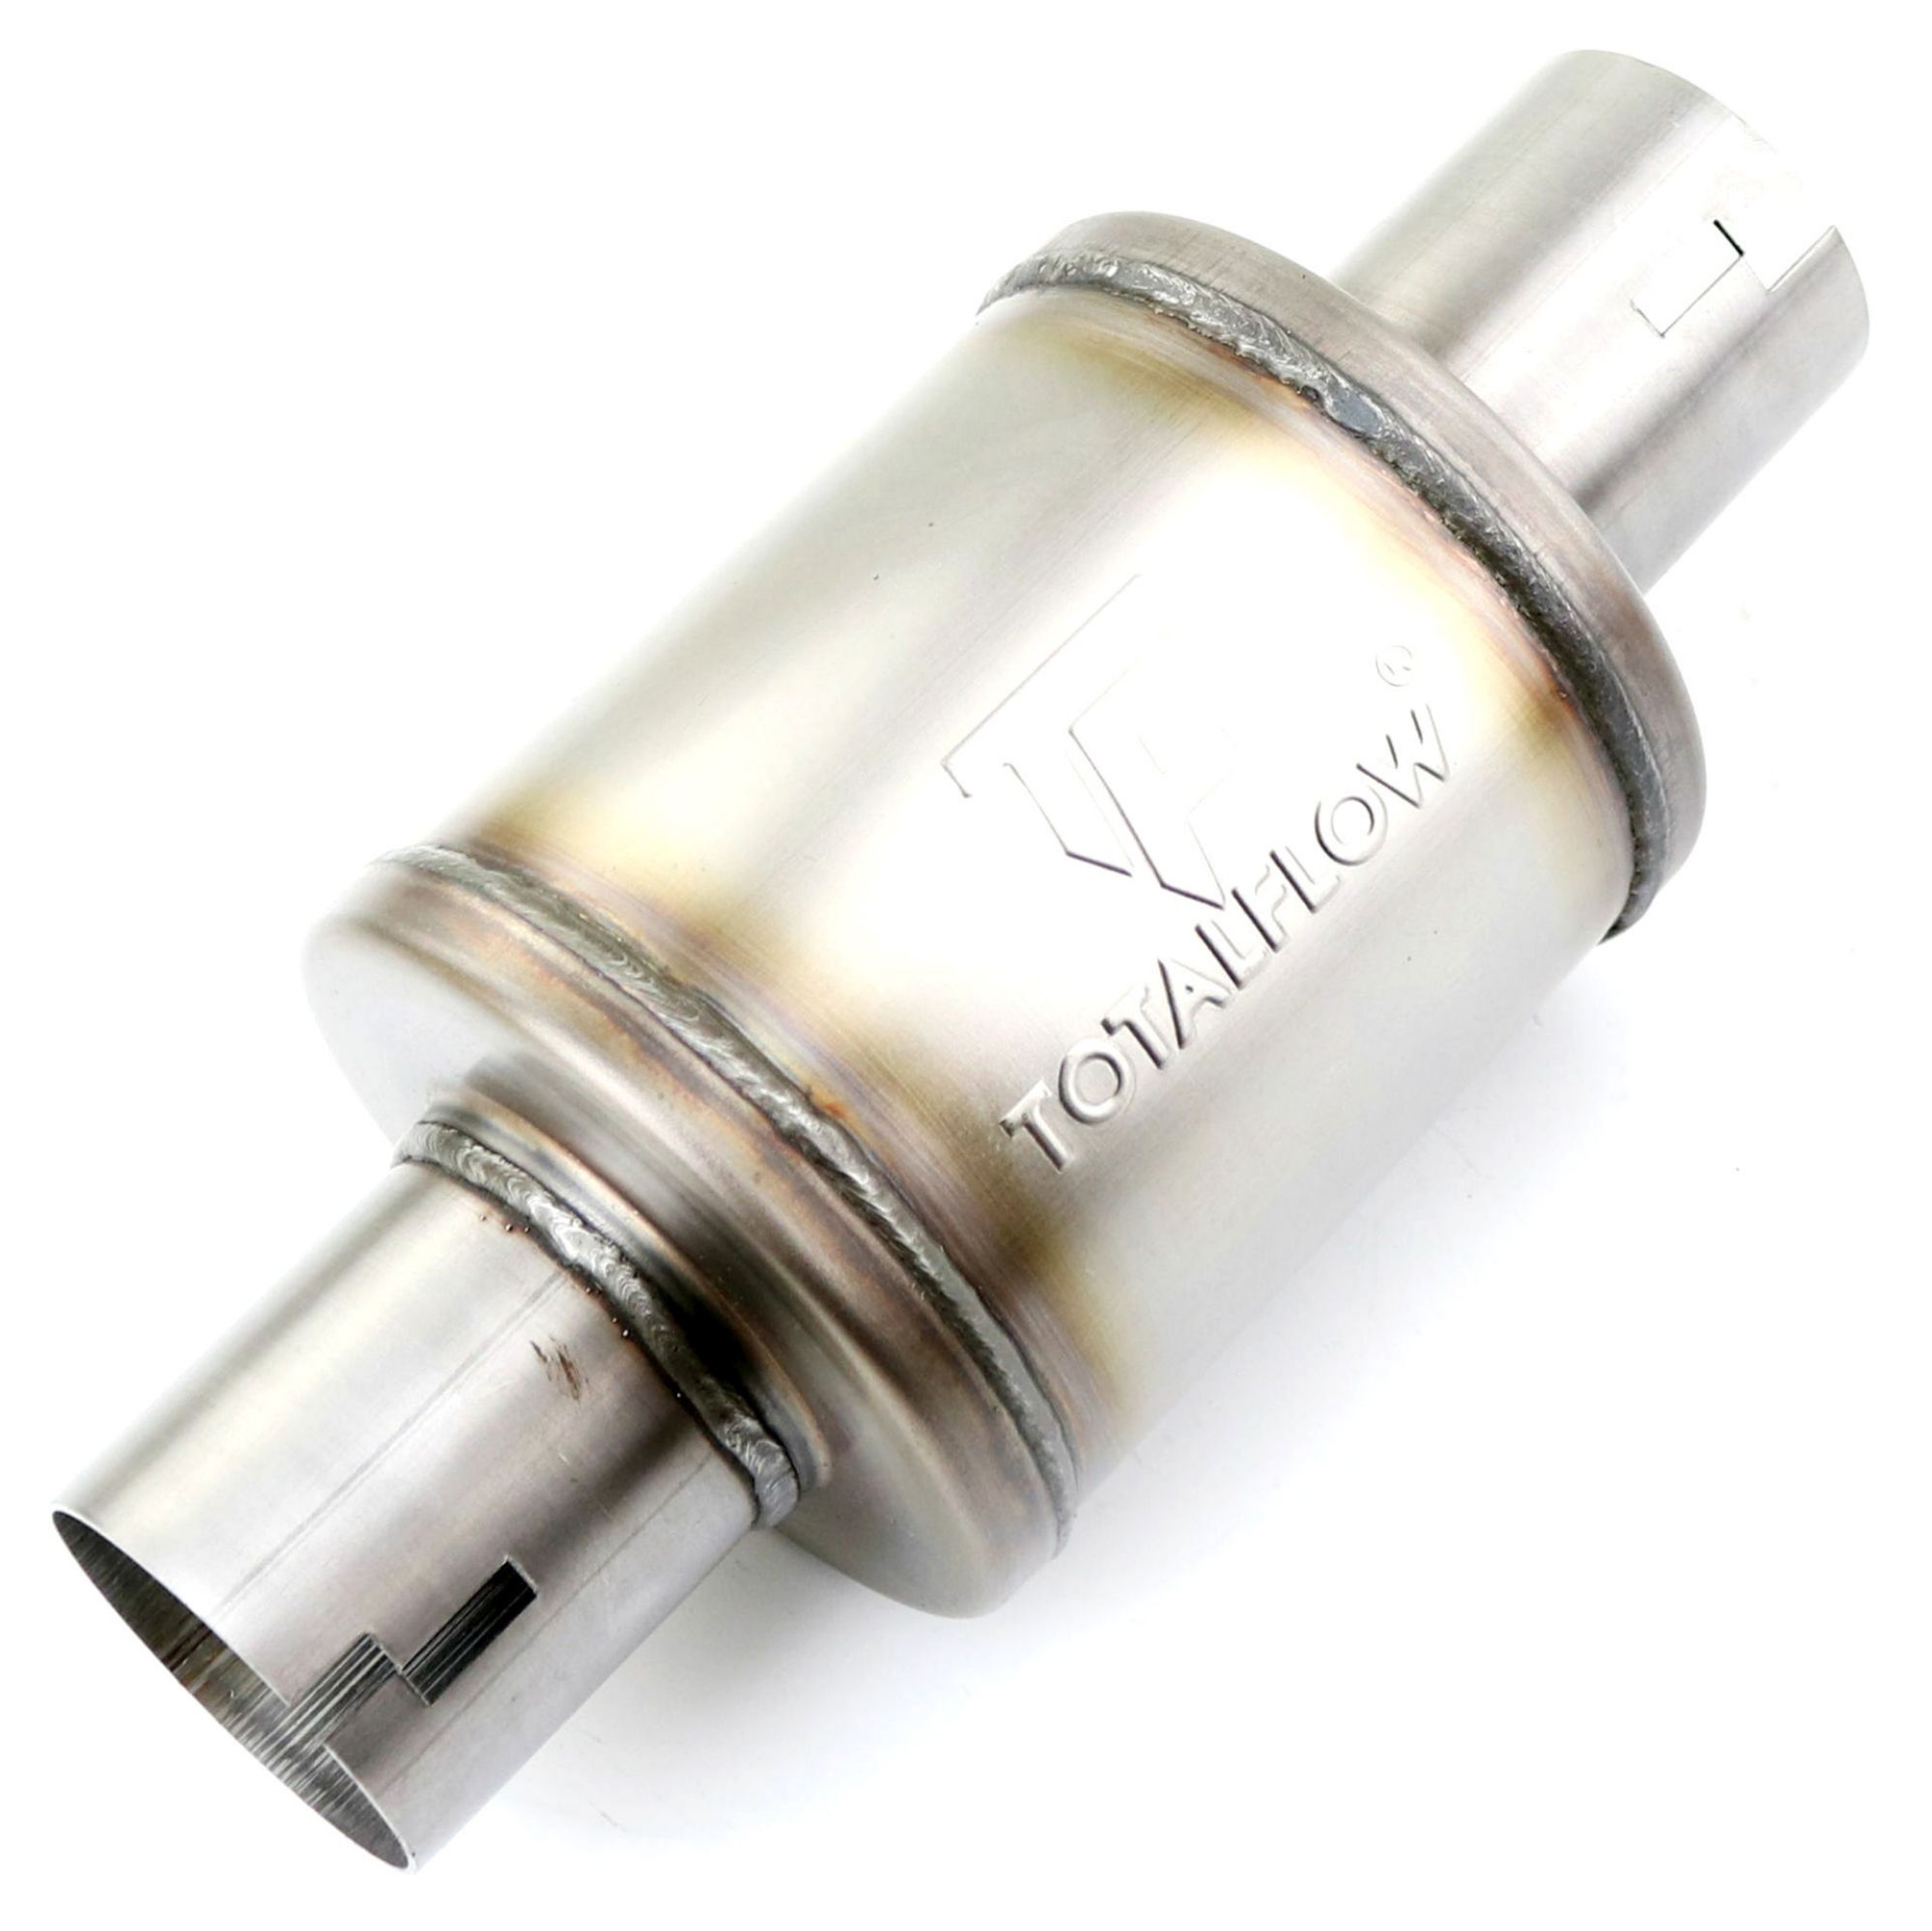 TOTALFLOW 20316N Straight Through Universal 2-1/2" Inch Notched Ends Exhaust Muffler - 2.5 Inch ID